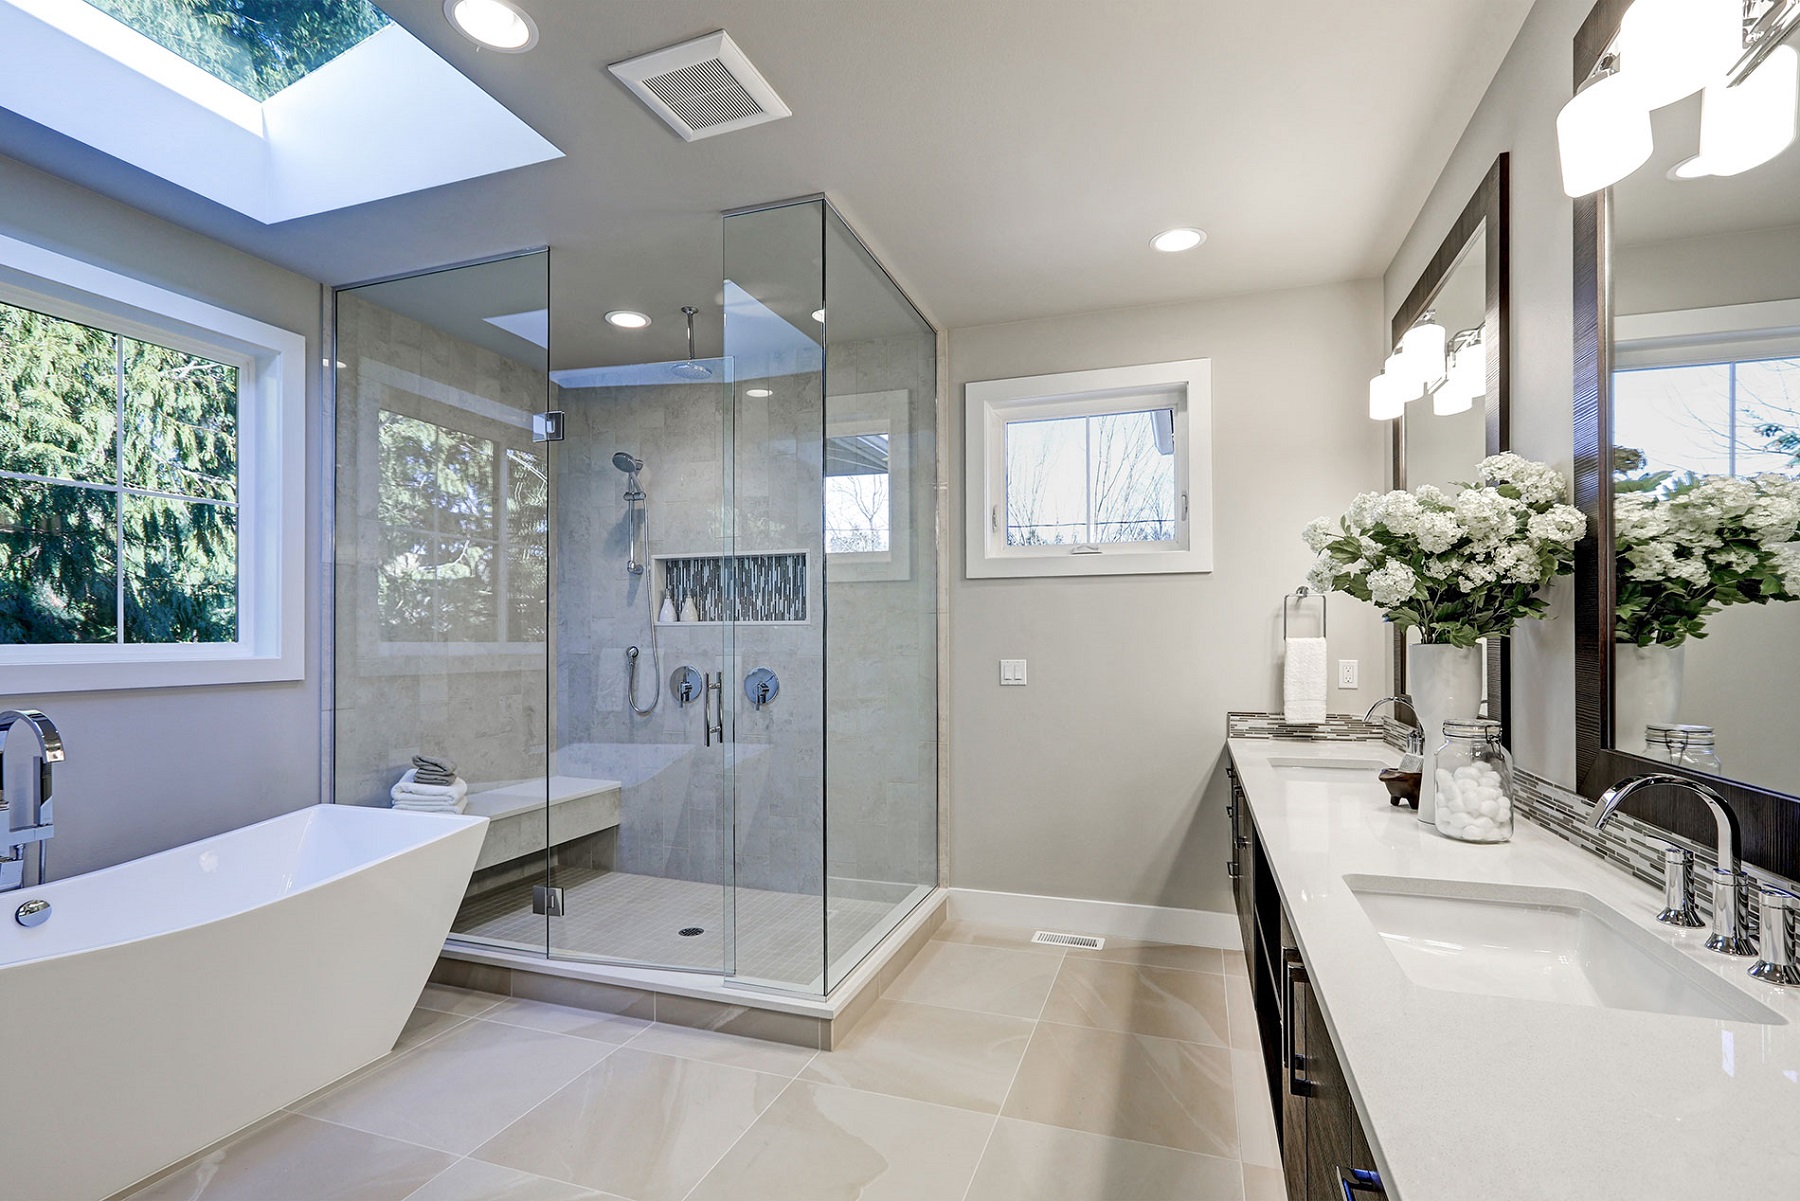 How Much Does A Shower Remodel Cost, How Much Does It Cost To Renovate A Small Bathroom